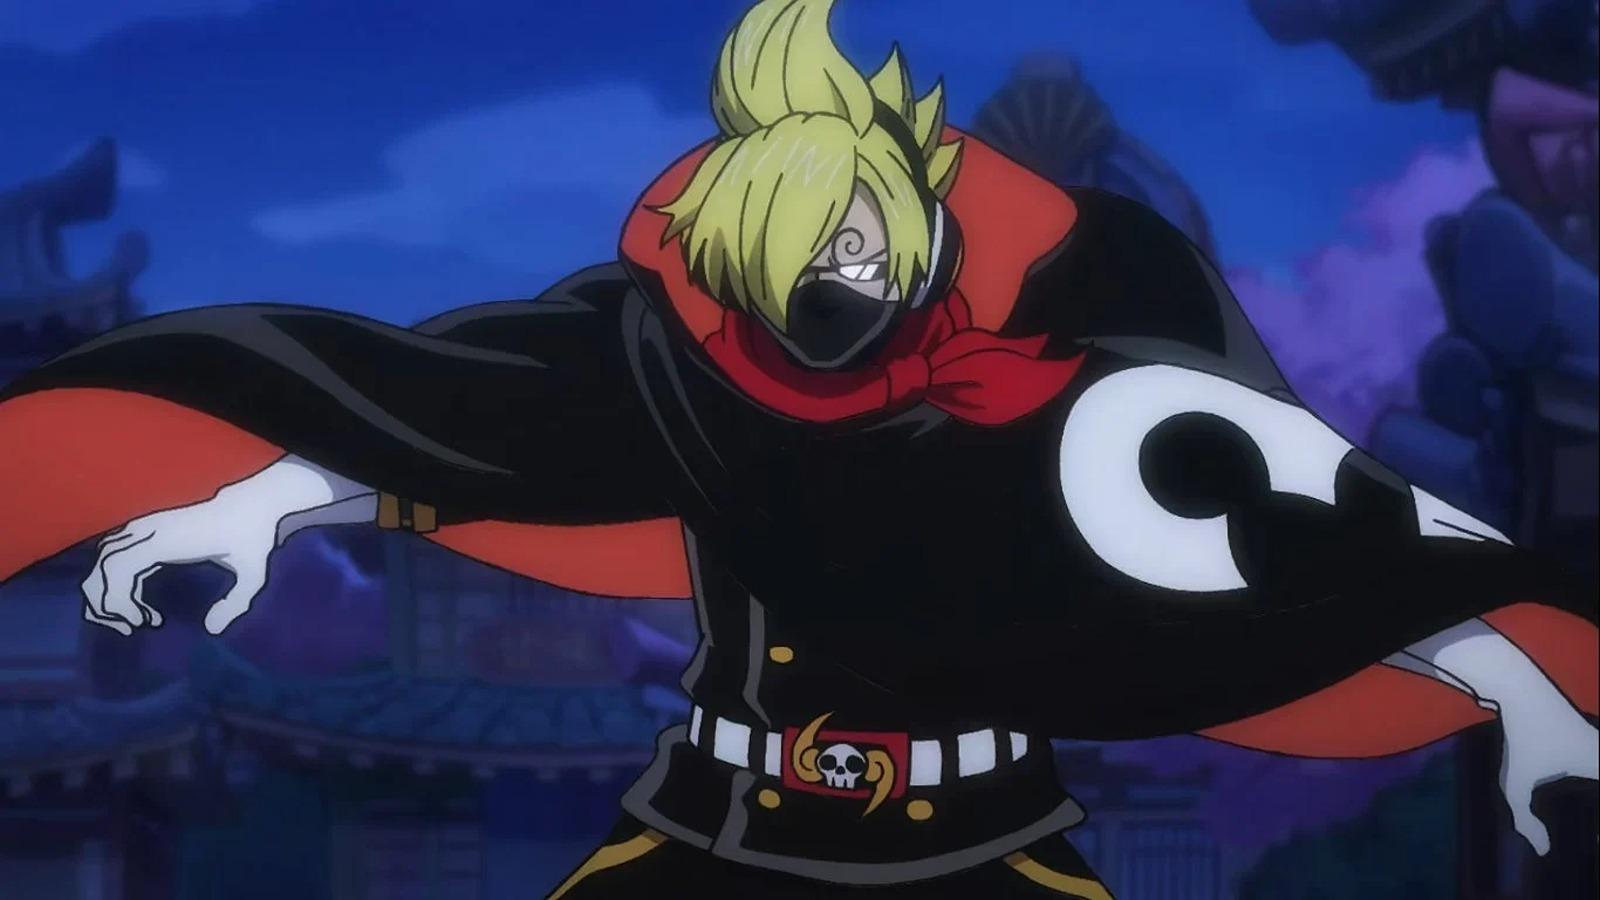 An image of Sanji's appearance in his Raid Suit